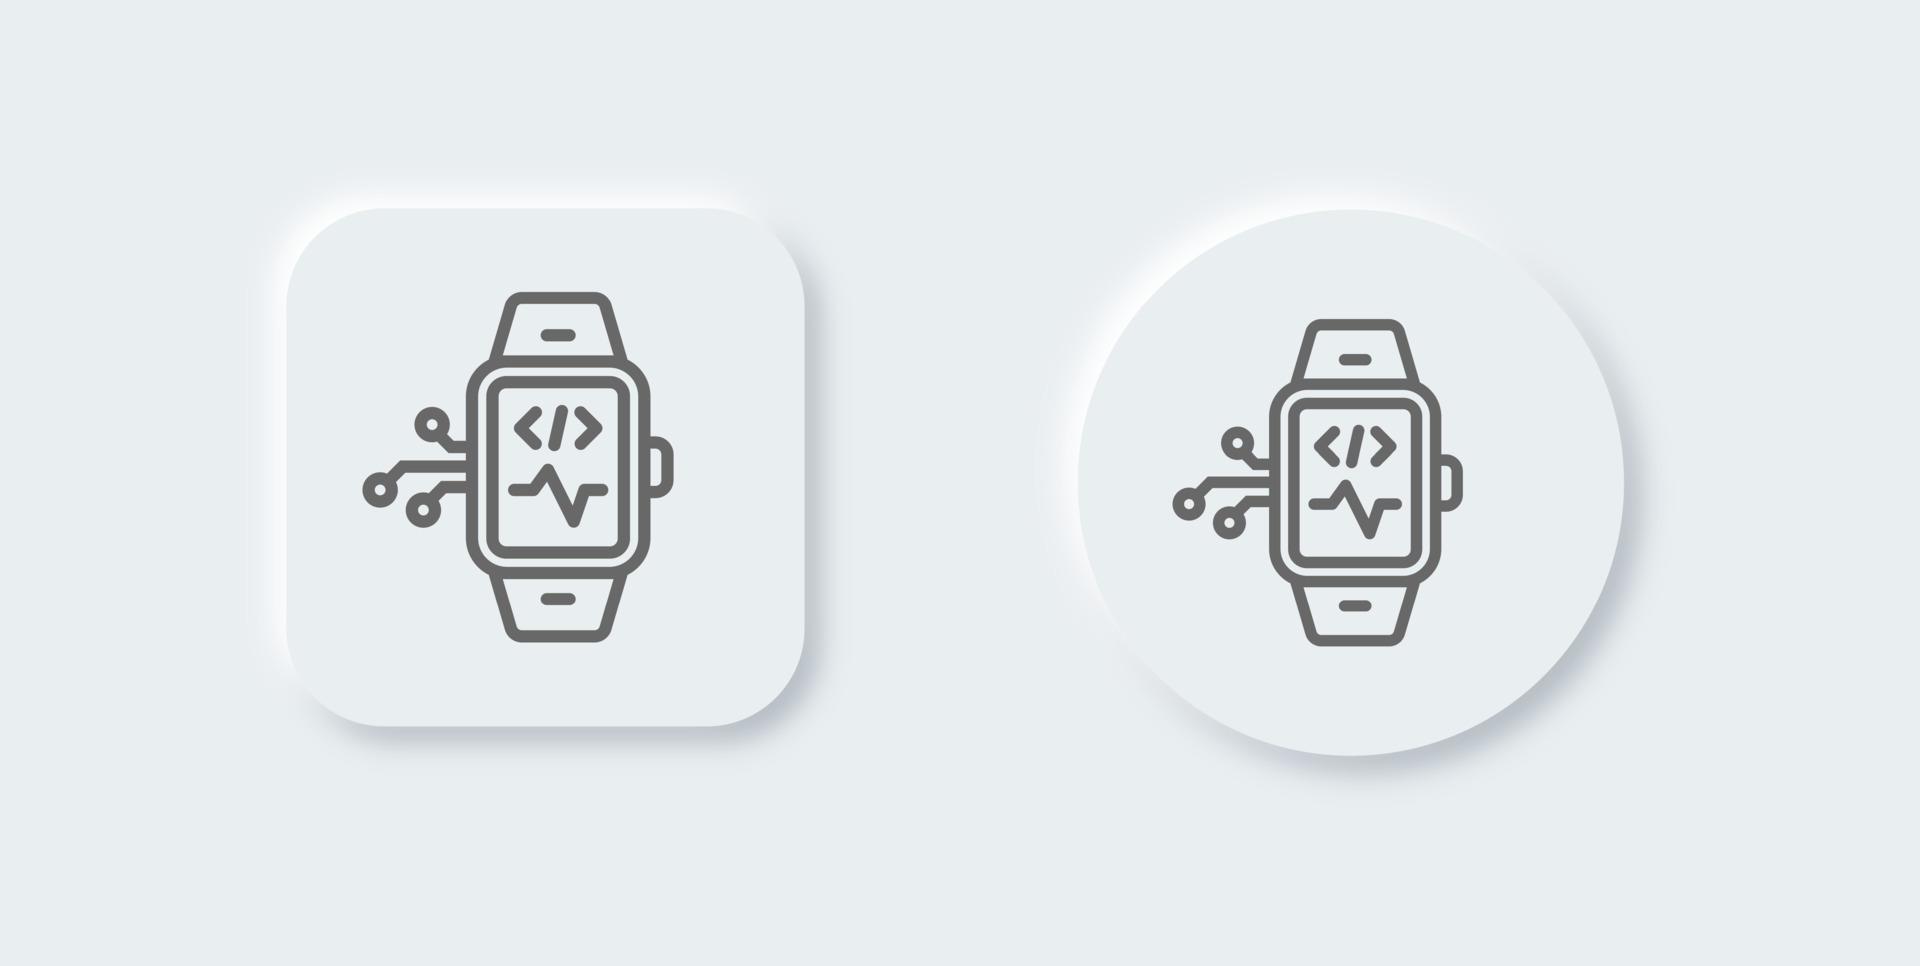 Smartwatch line icon in neomorphic design style. Smart watch signs vector illustration.